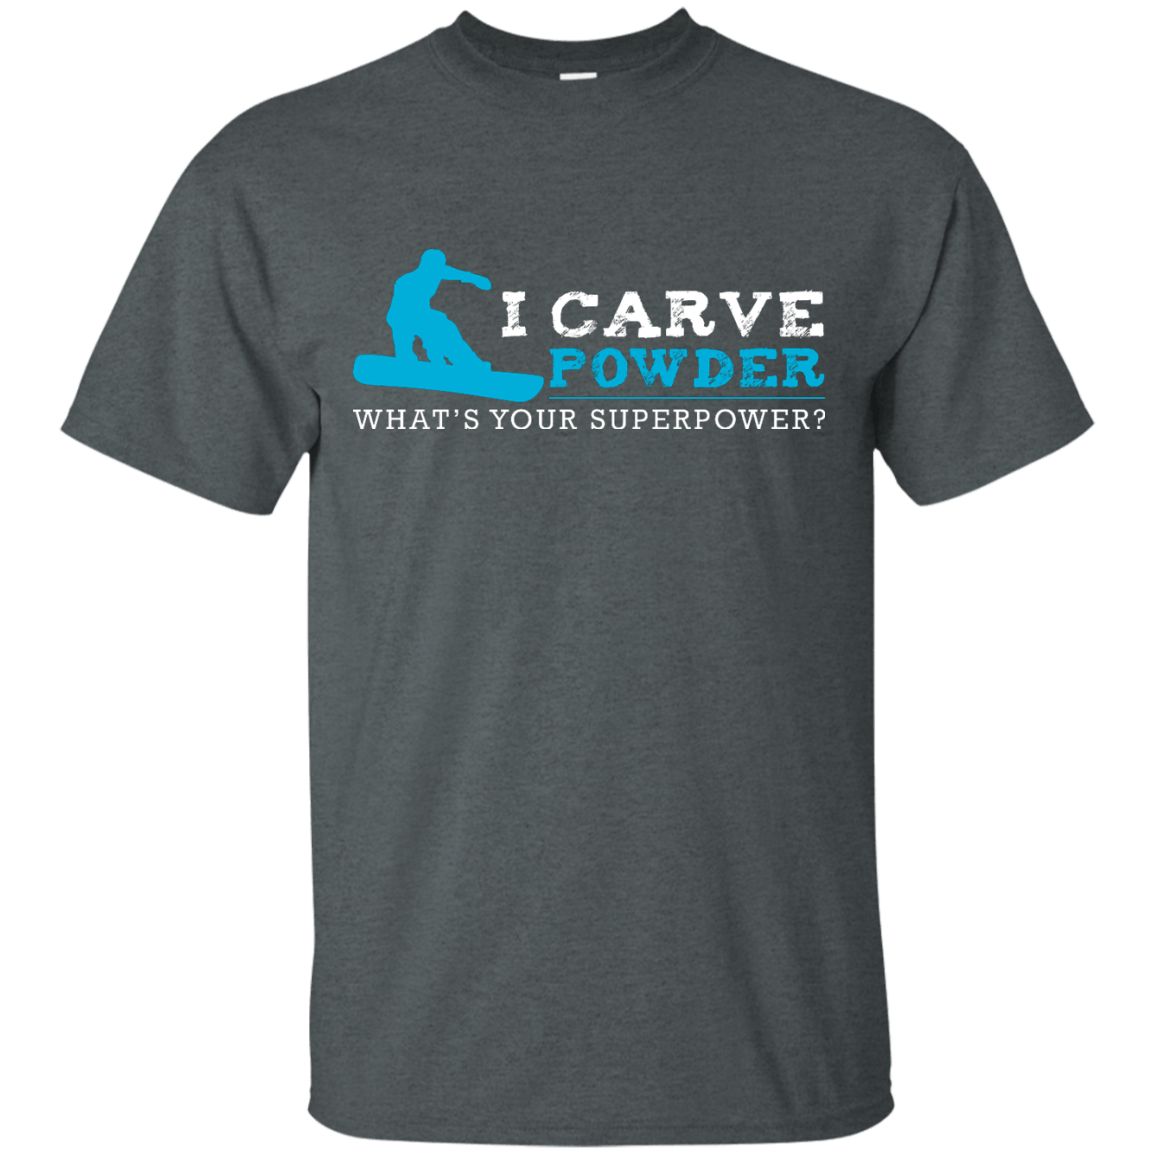 I Carve Powder What's Your Superpower - Snowboard Men's Tees and V-Neck - Powderaddicts